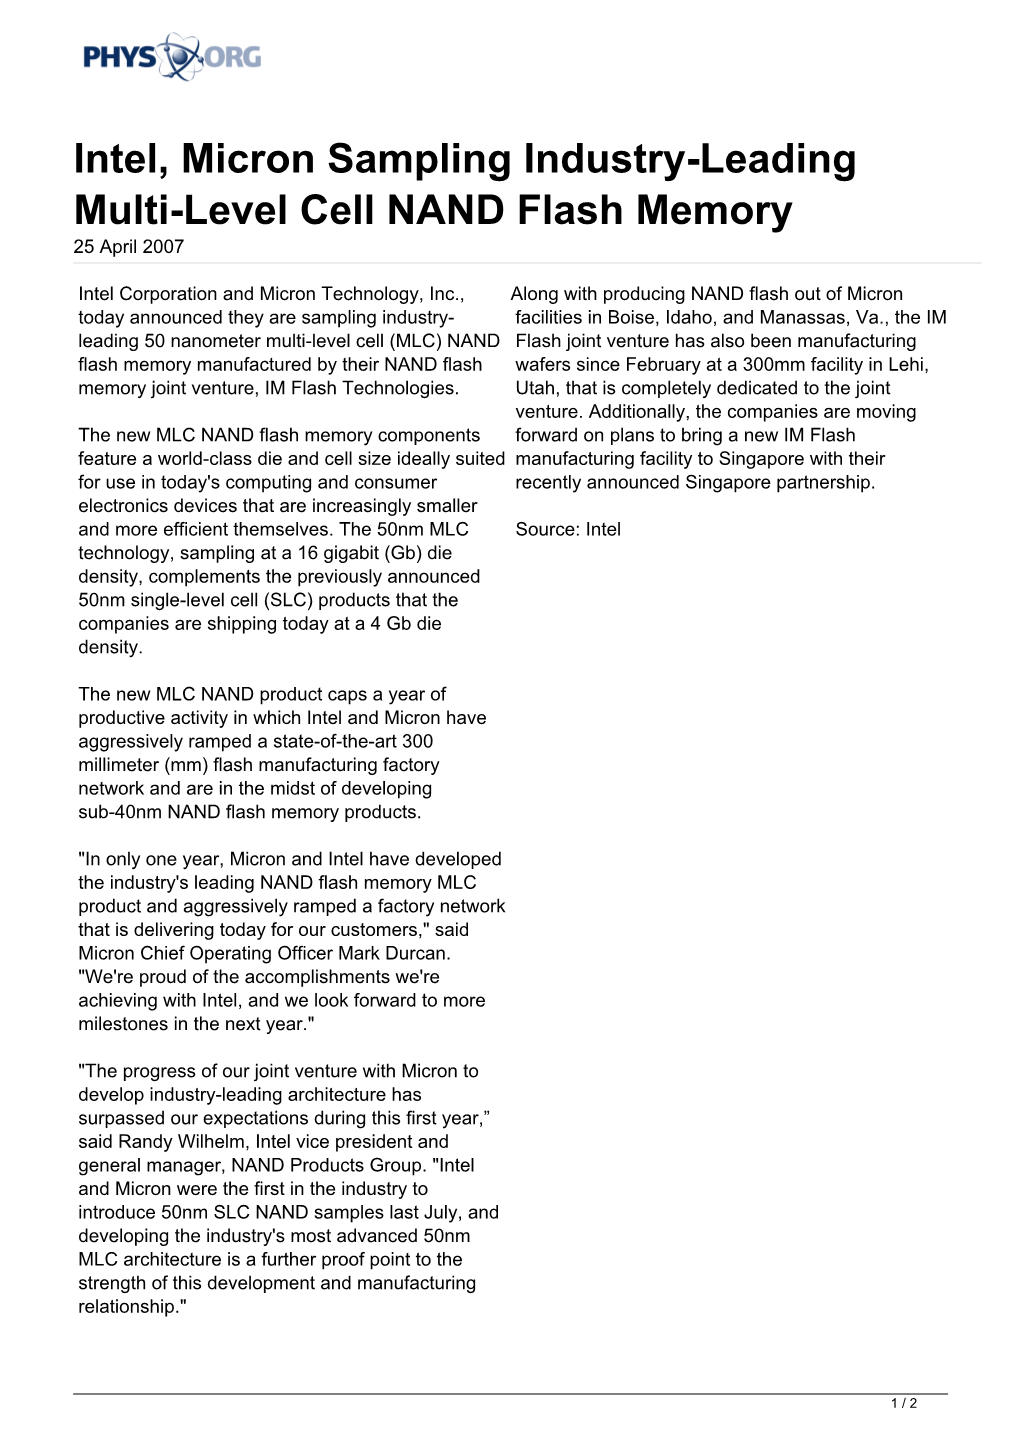 Intel, Micron Sampling Industry-Leading Multi-Level Cell NAND Flash Memory 25 April 2007